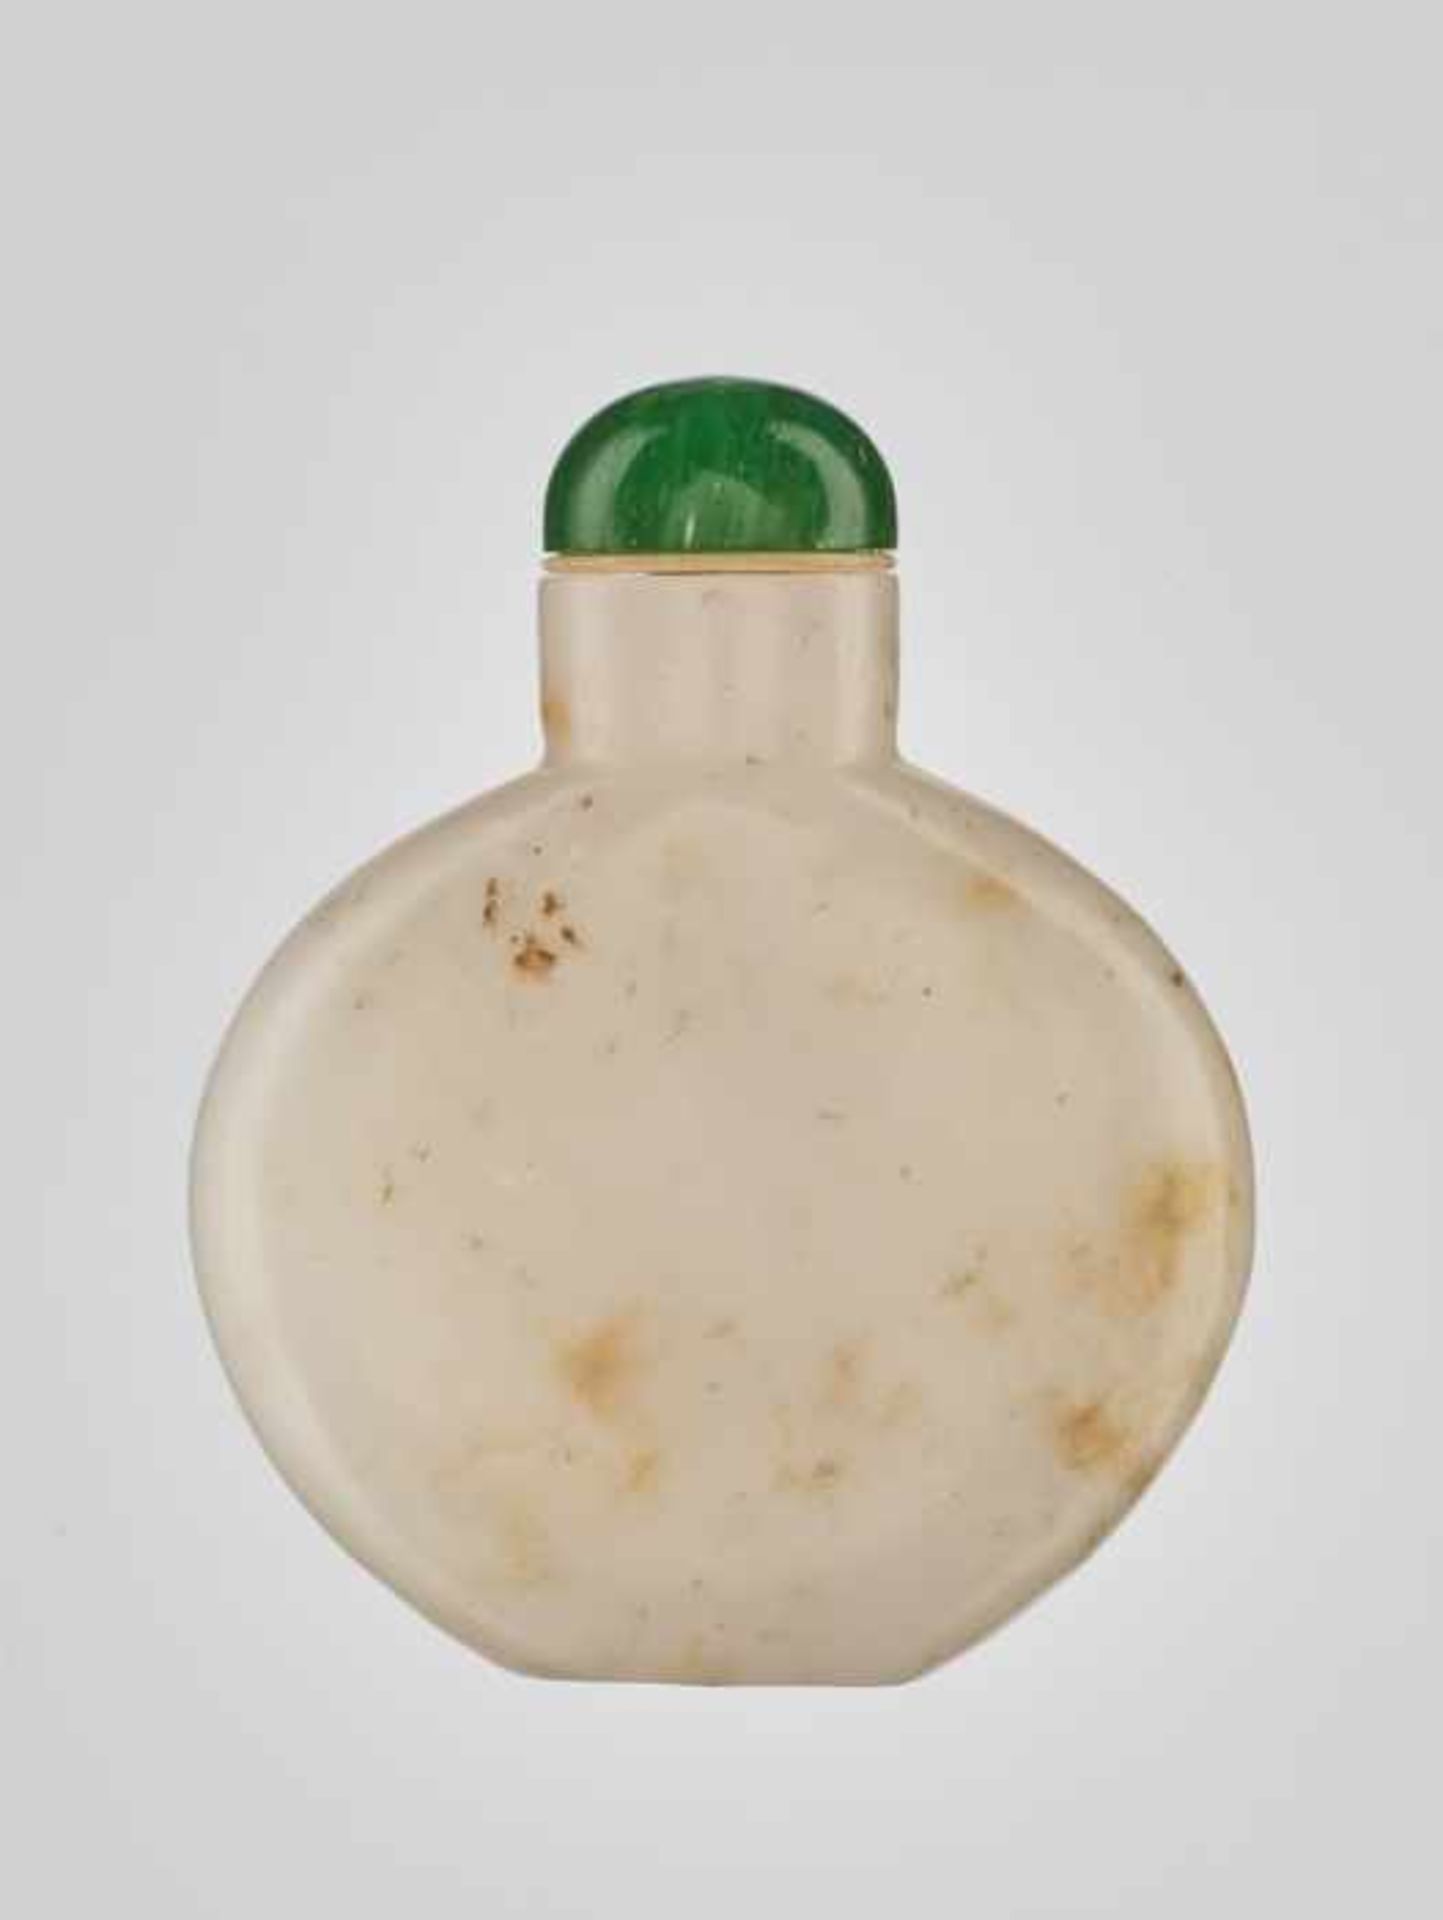 A PLAIN WHITE AND RUSSET CALCITE BOTTLE, 1780-1860 Opaque white calcite with russet streaks and